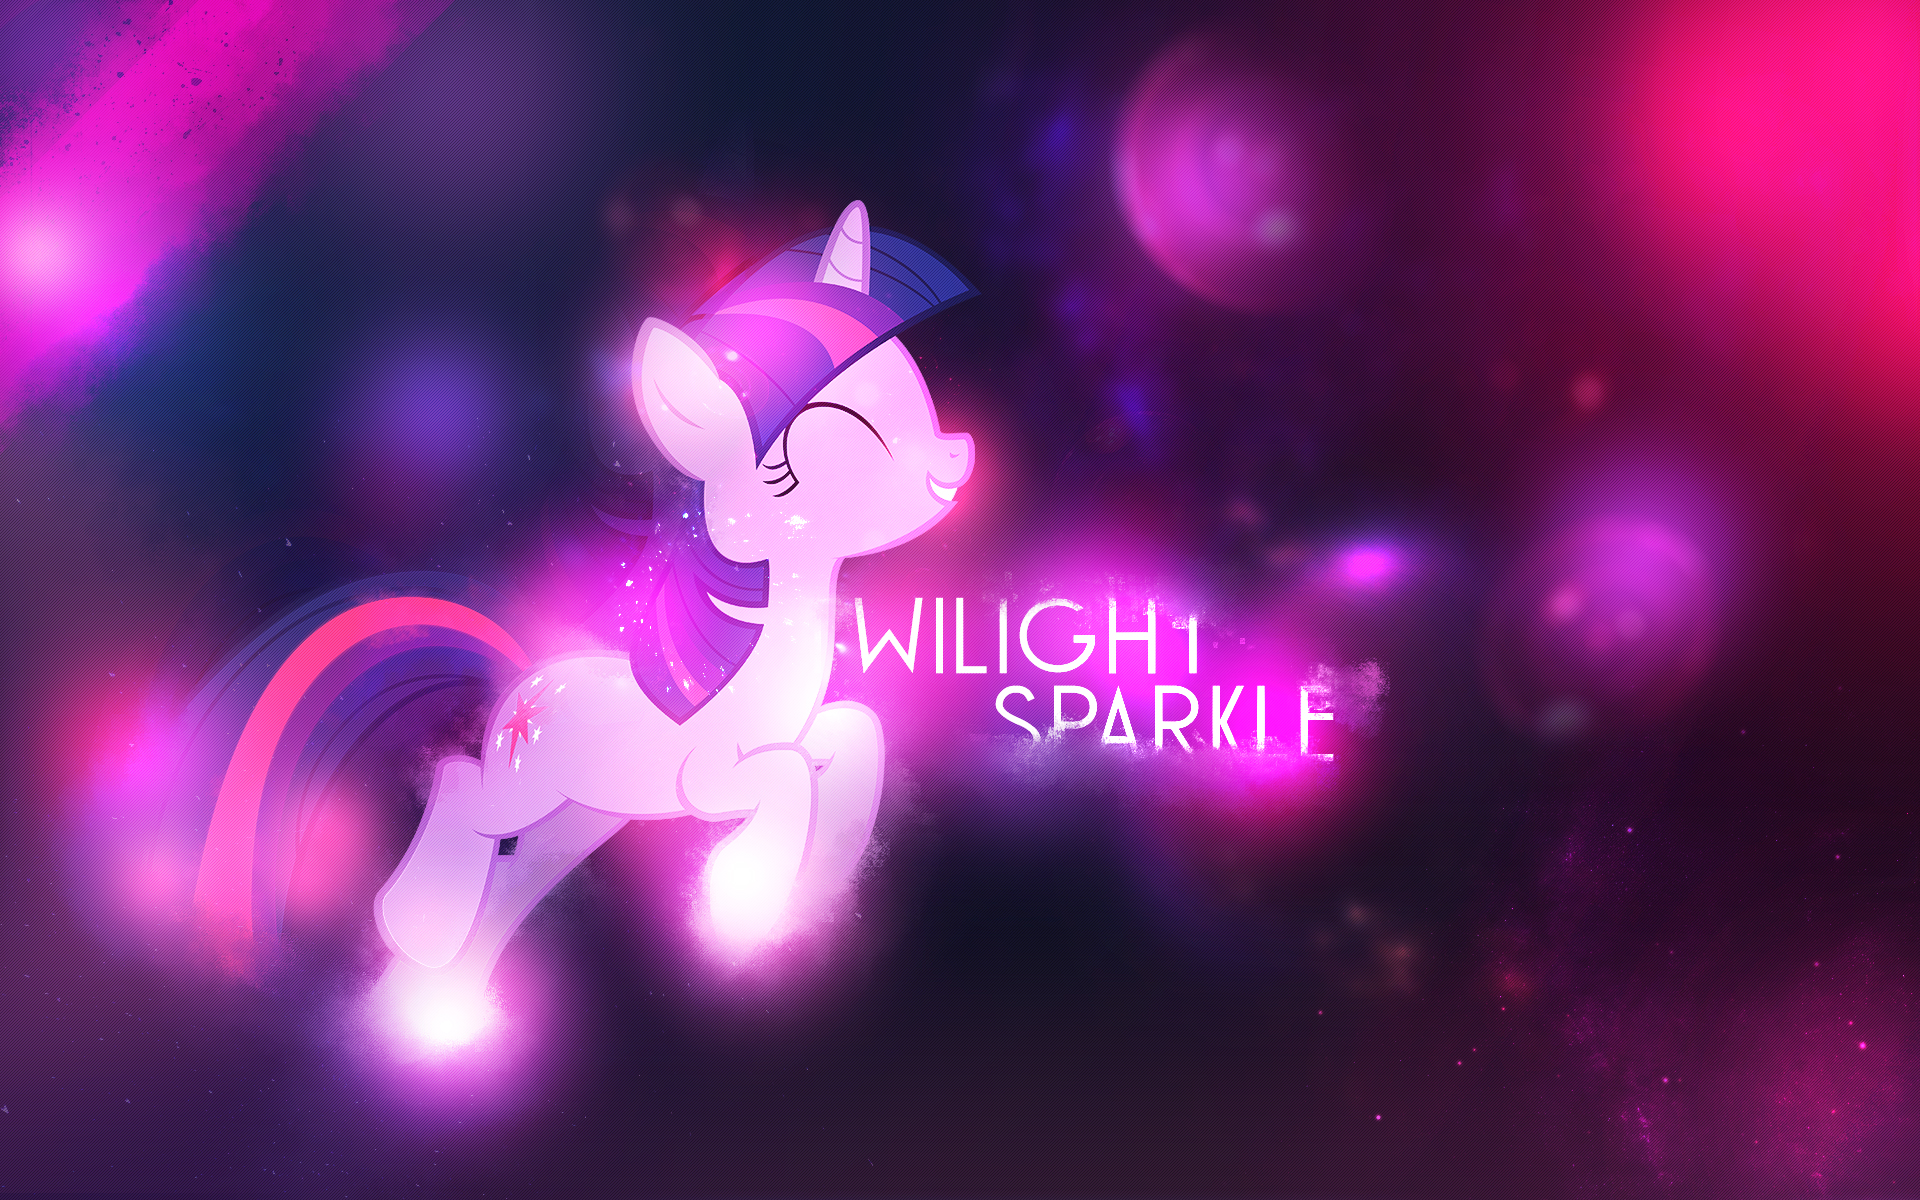 Twilight! by Bommster and Dentist73548